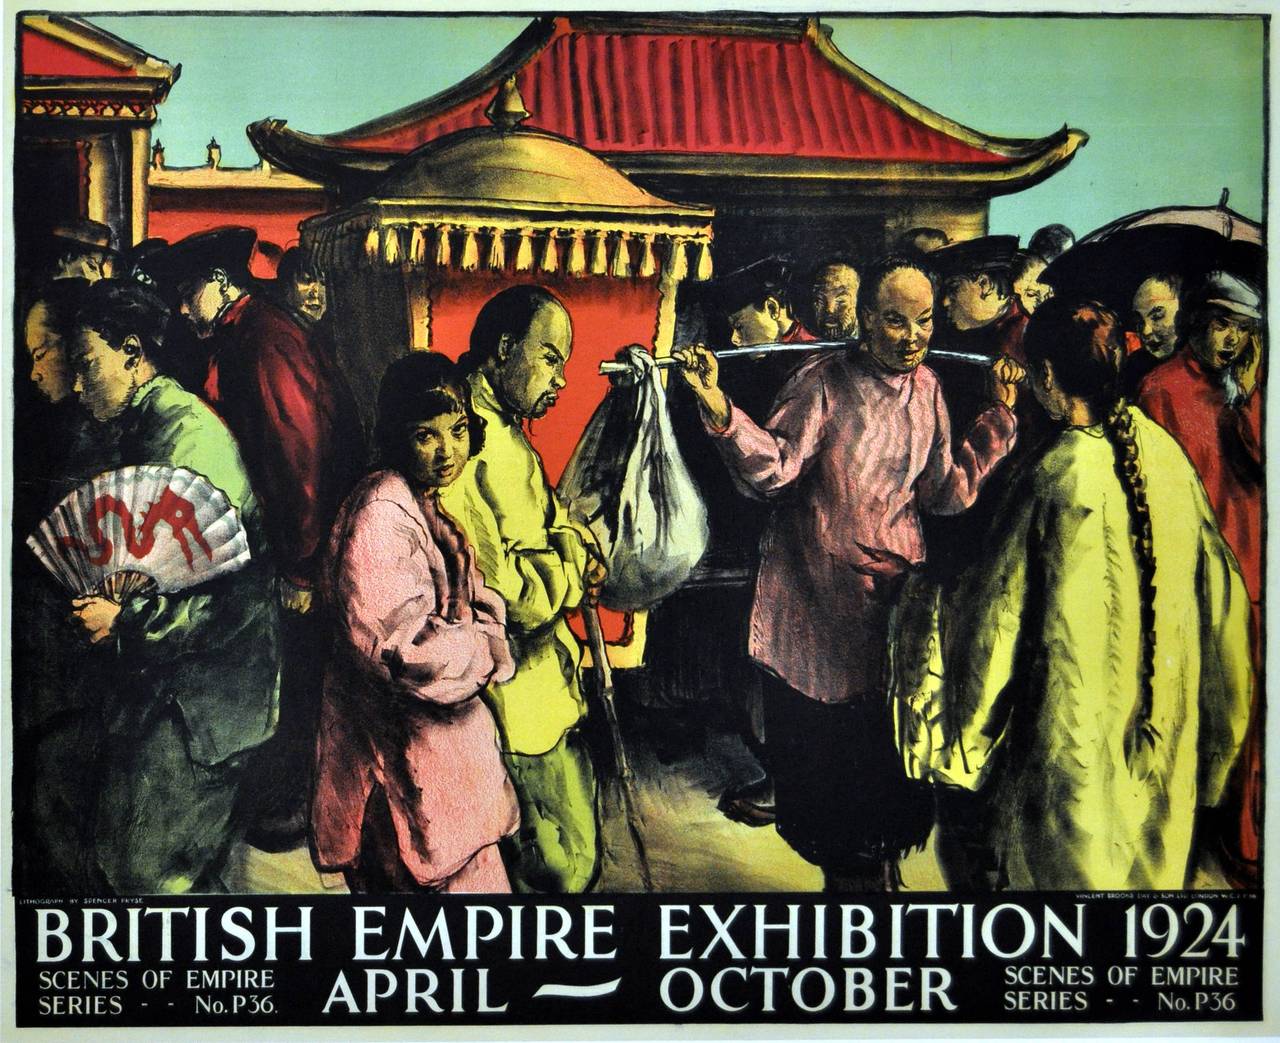 Spencer Pryse Print - Original Vintage Advertising Poster for the British Empire Exhibition 1924